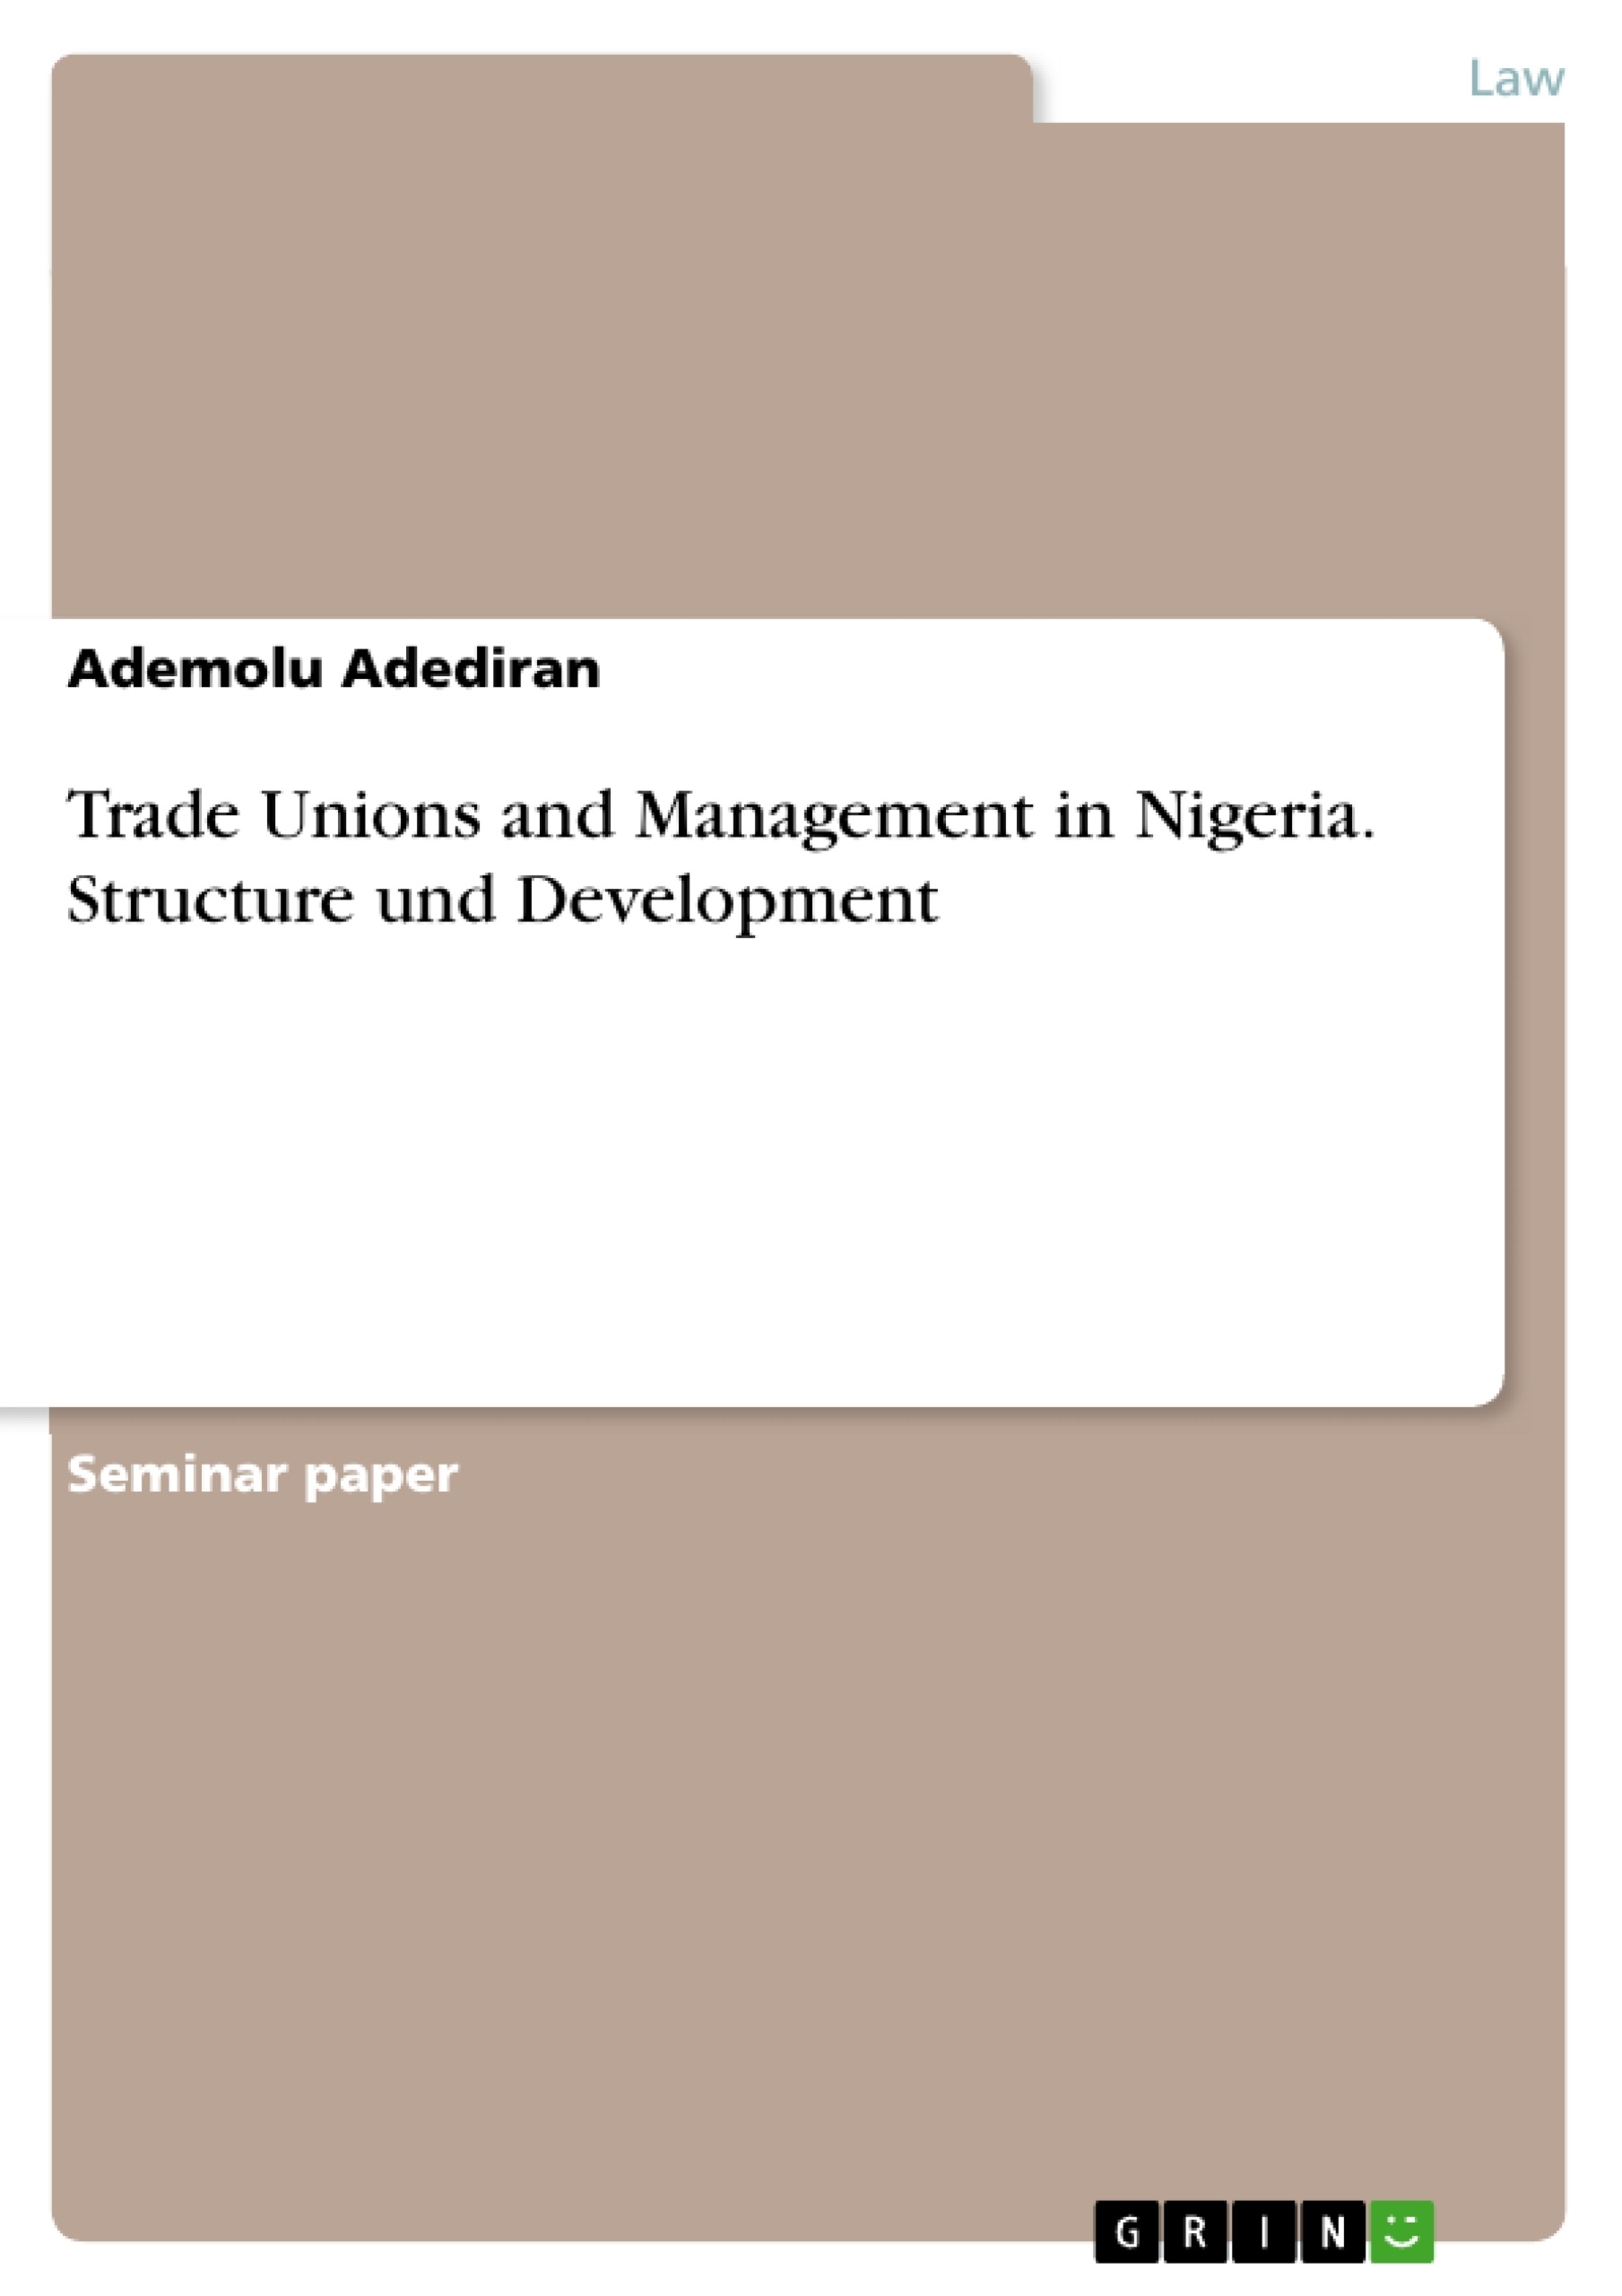 Título: Trade Unions and Management in Nigeria. Structure und Development